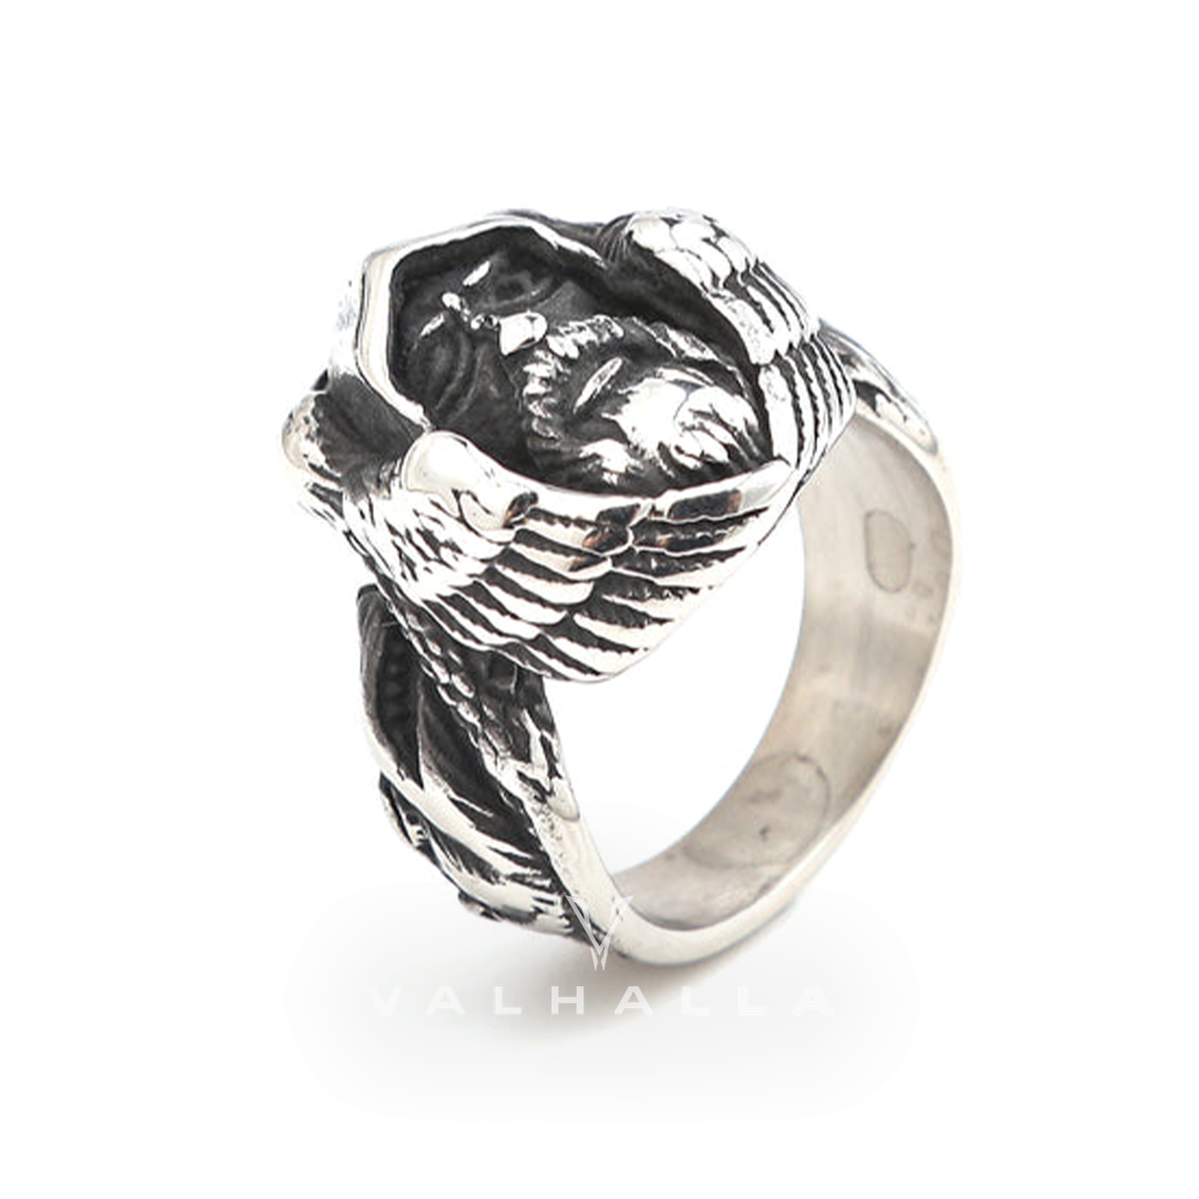 Handcrafted Stainless Steel Viking Odin Ring With Raven and Wolf